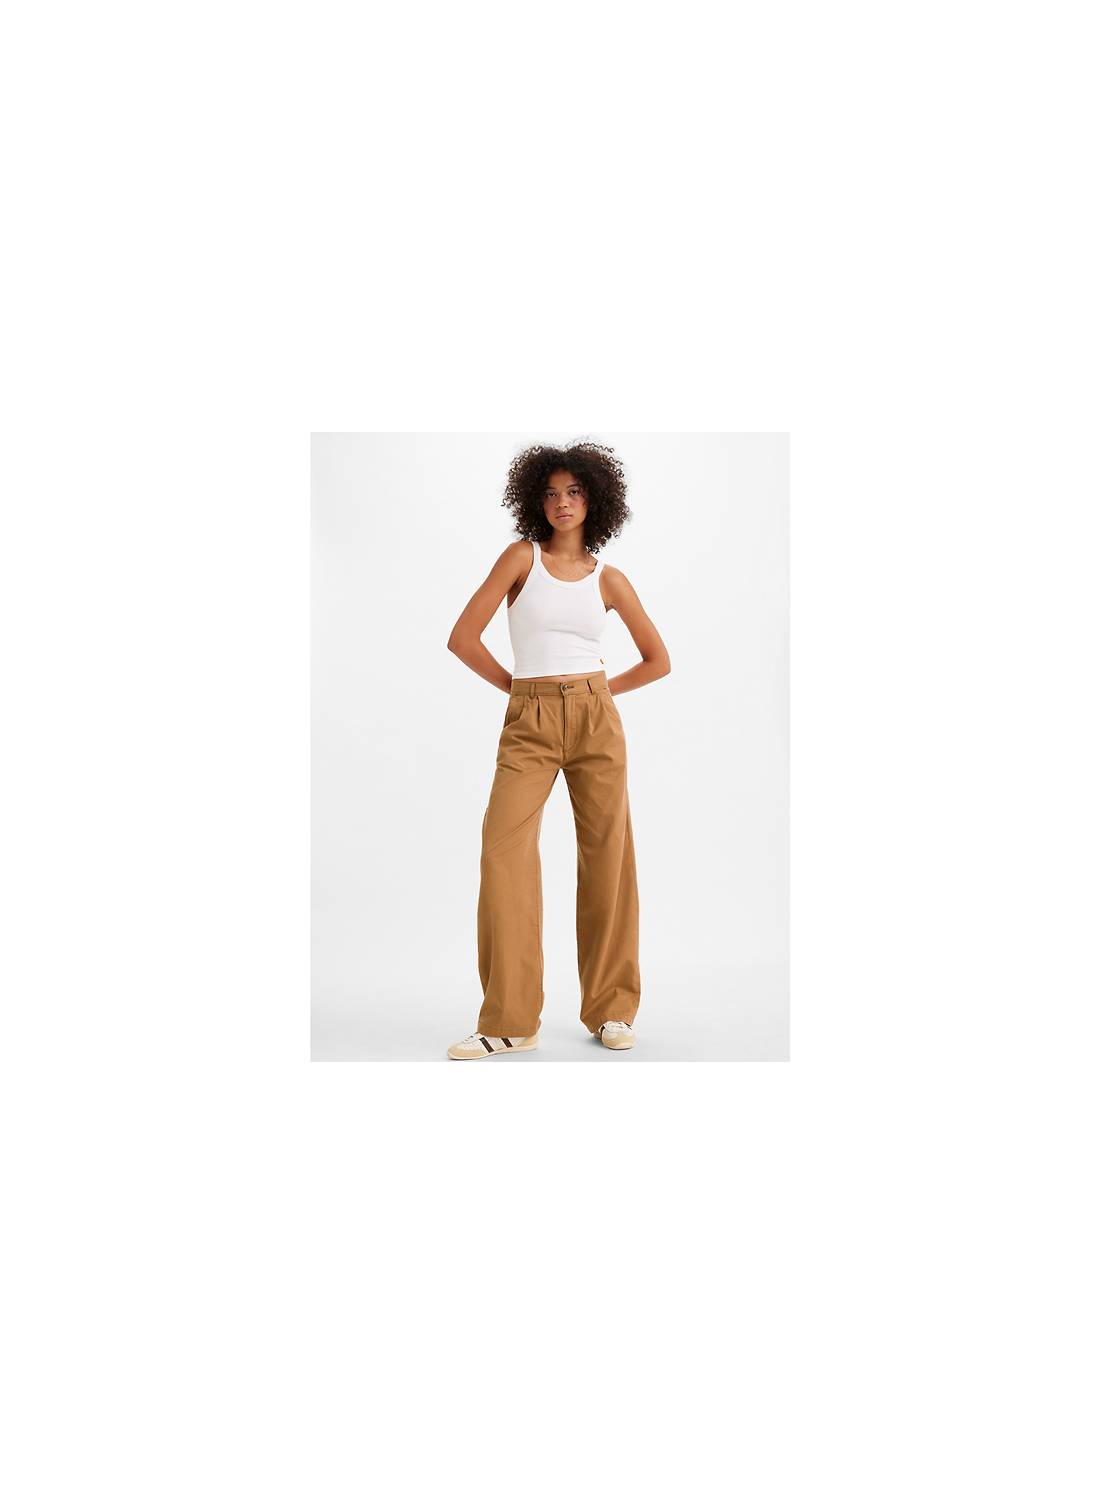 Miiyana Cuffed Ankle Pants for Women Trendy High Waist Dressy Pants with  Pockets Button Down Khaki XL at  Women's Clothing store